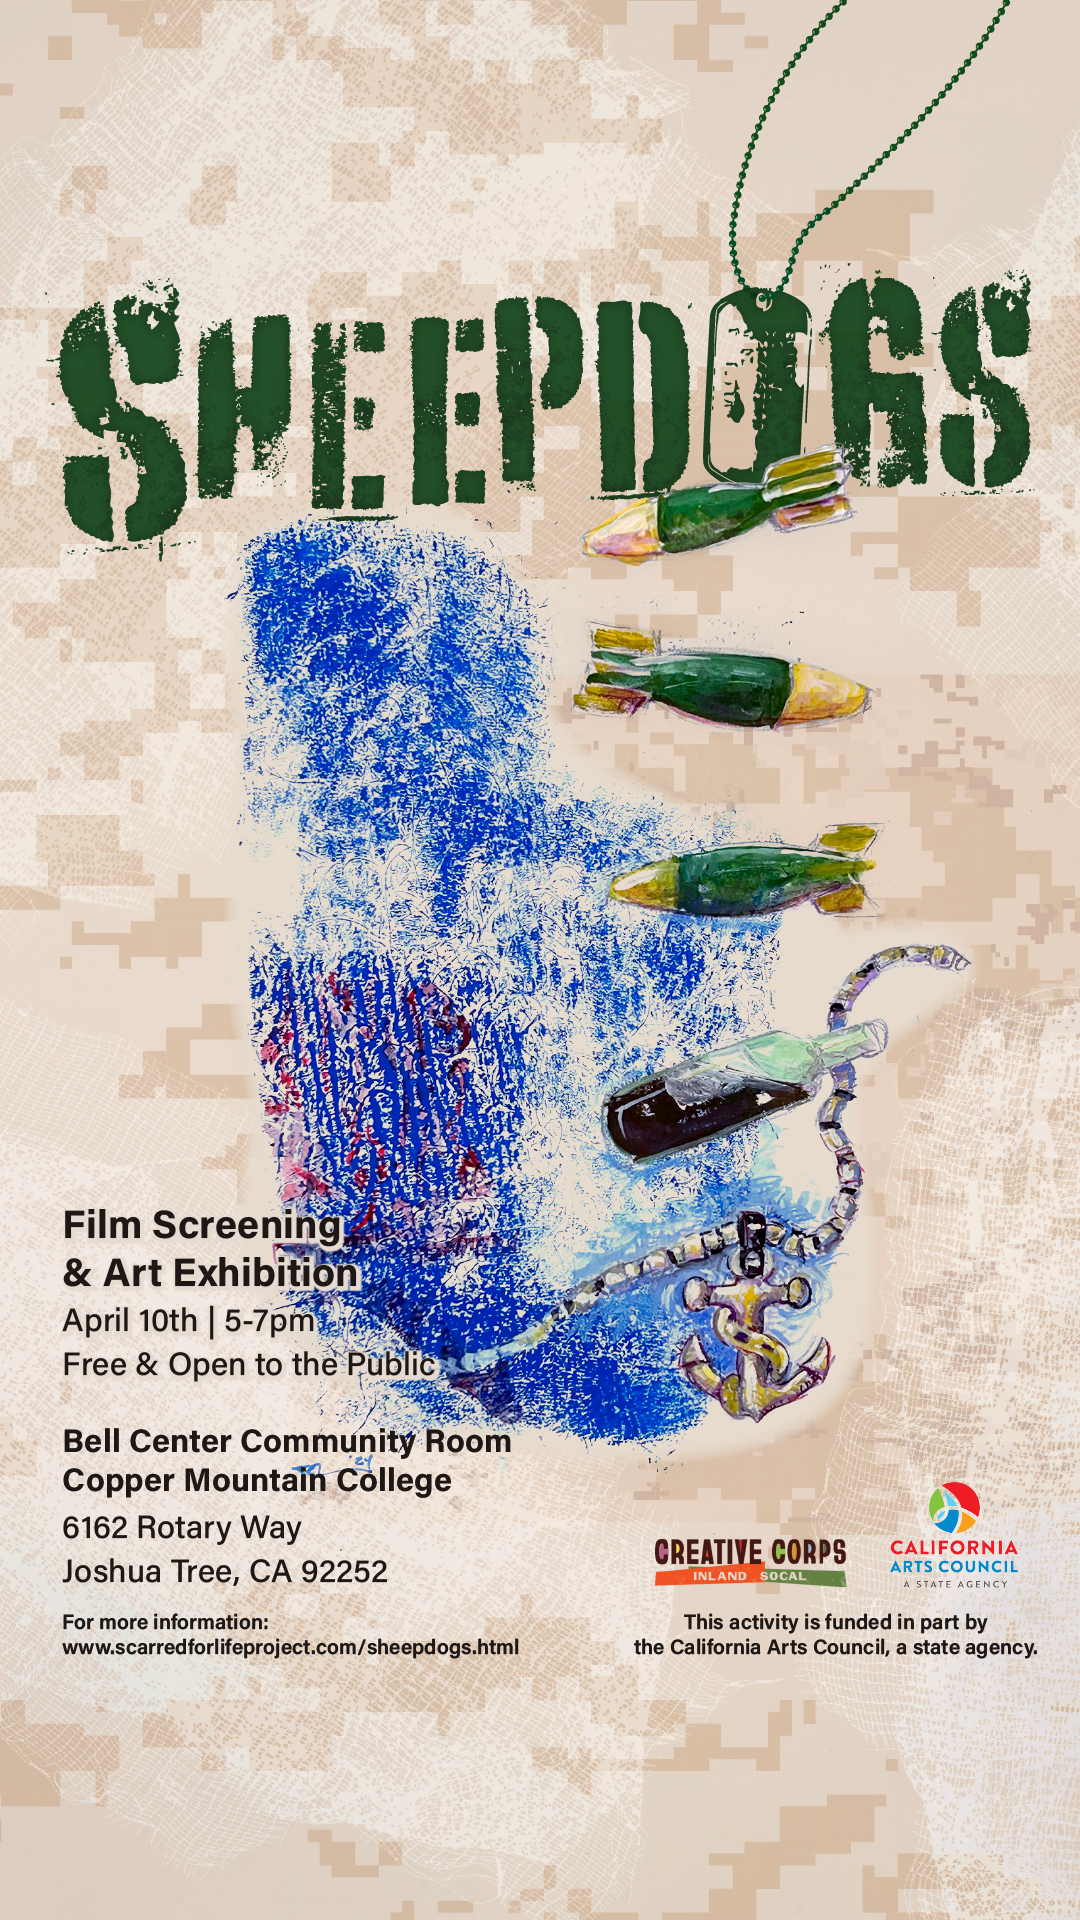 Sheepdogs film screening and art exhibit poster